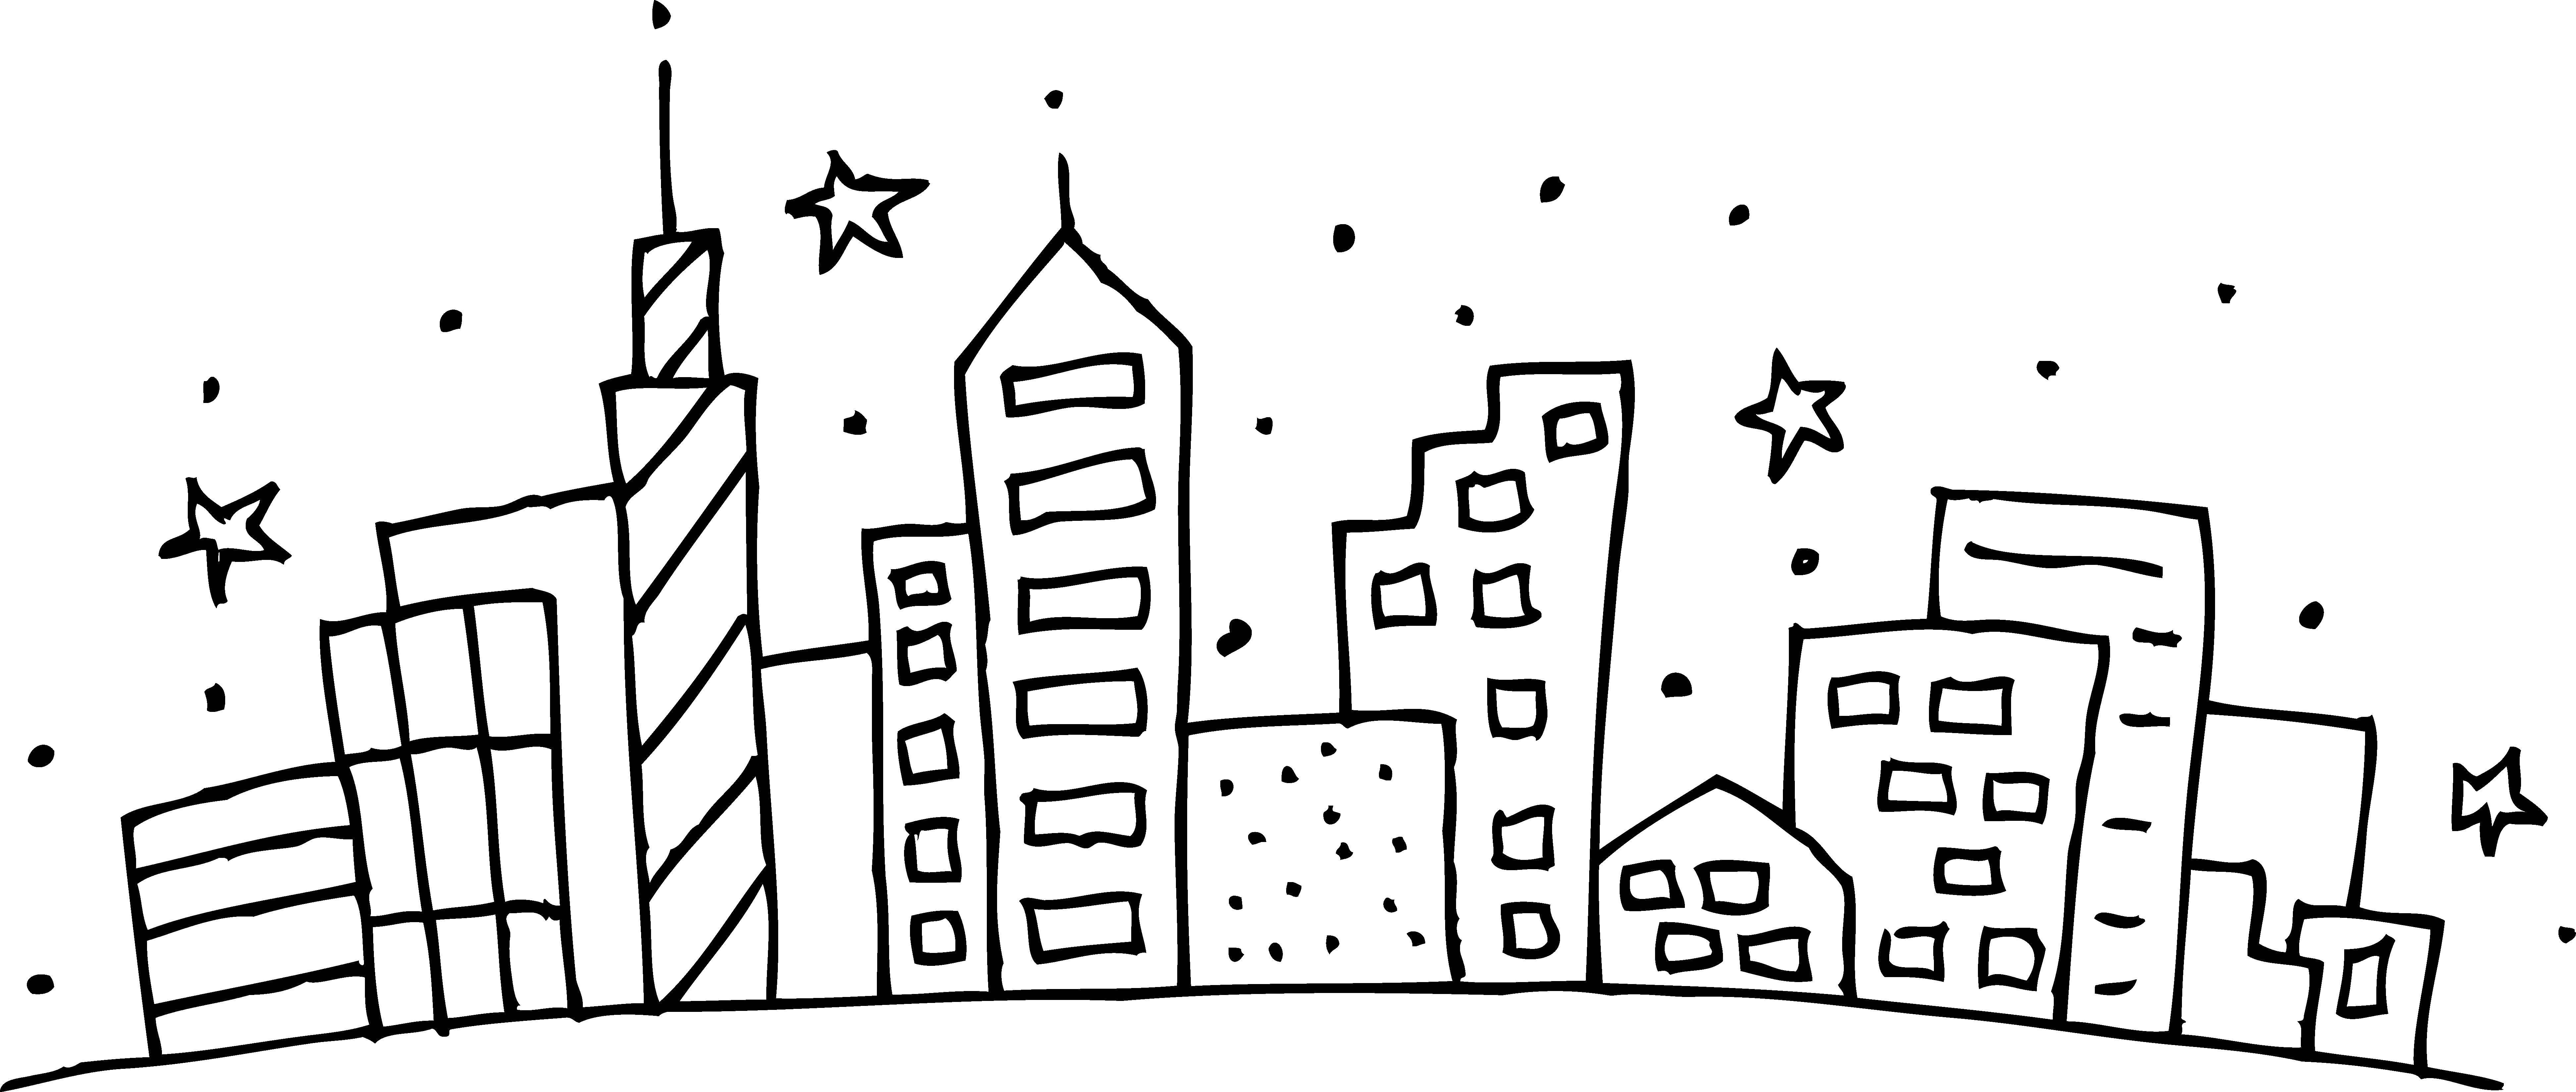 Coloring Starry sky over the city. Category building. Tags:  The city , home, building.